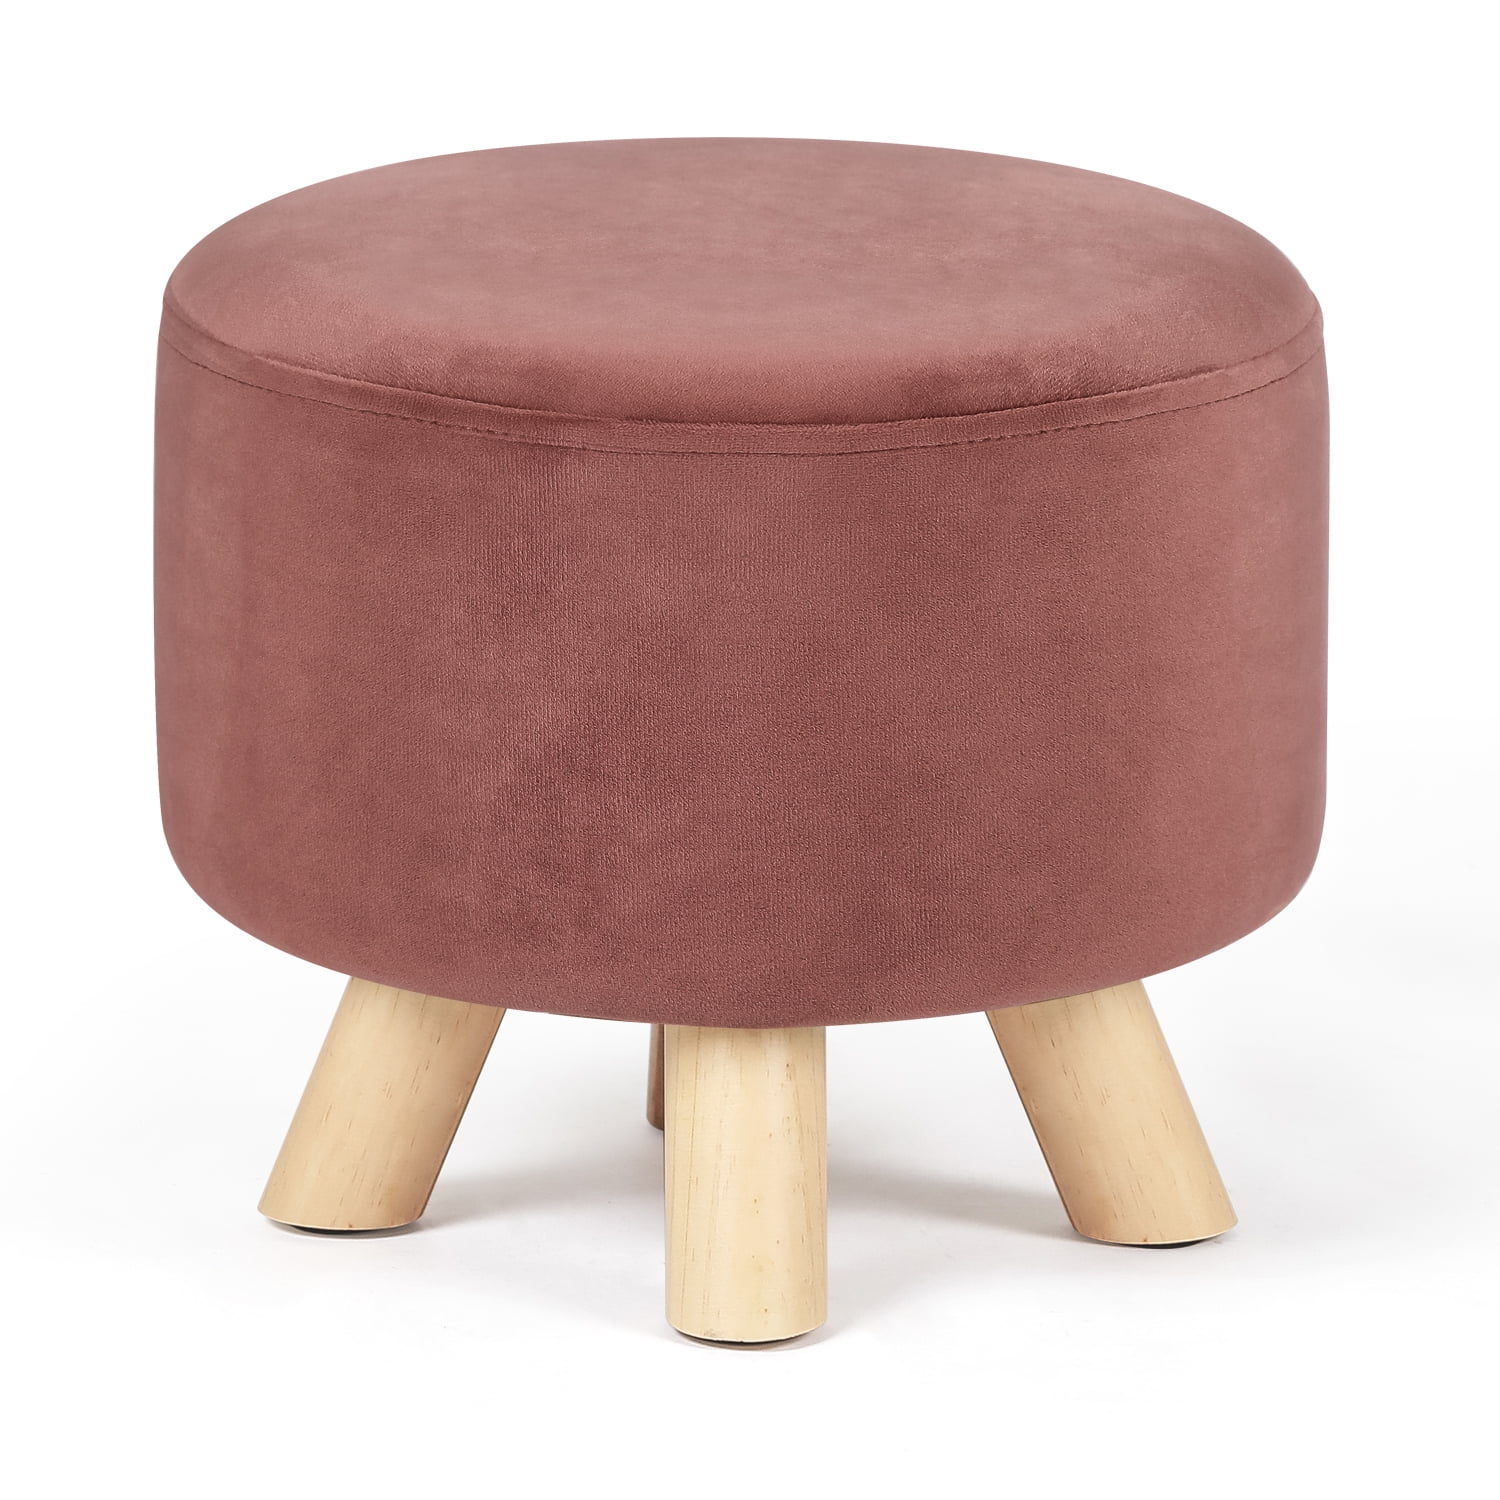 NEW Pink Little Stool Under Desk for the Office / 9-10 Cm Height Small  Upholstered Foot Stool / Handmade Footstool / Footrest 